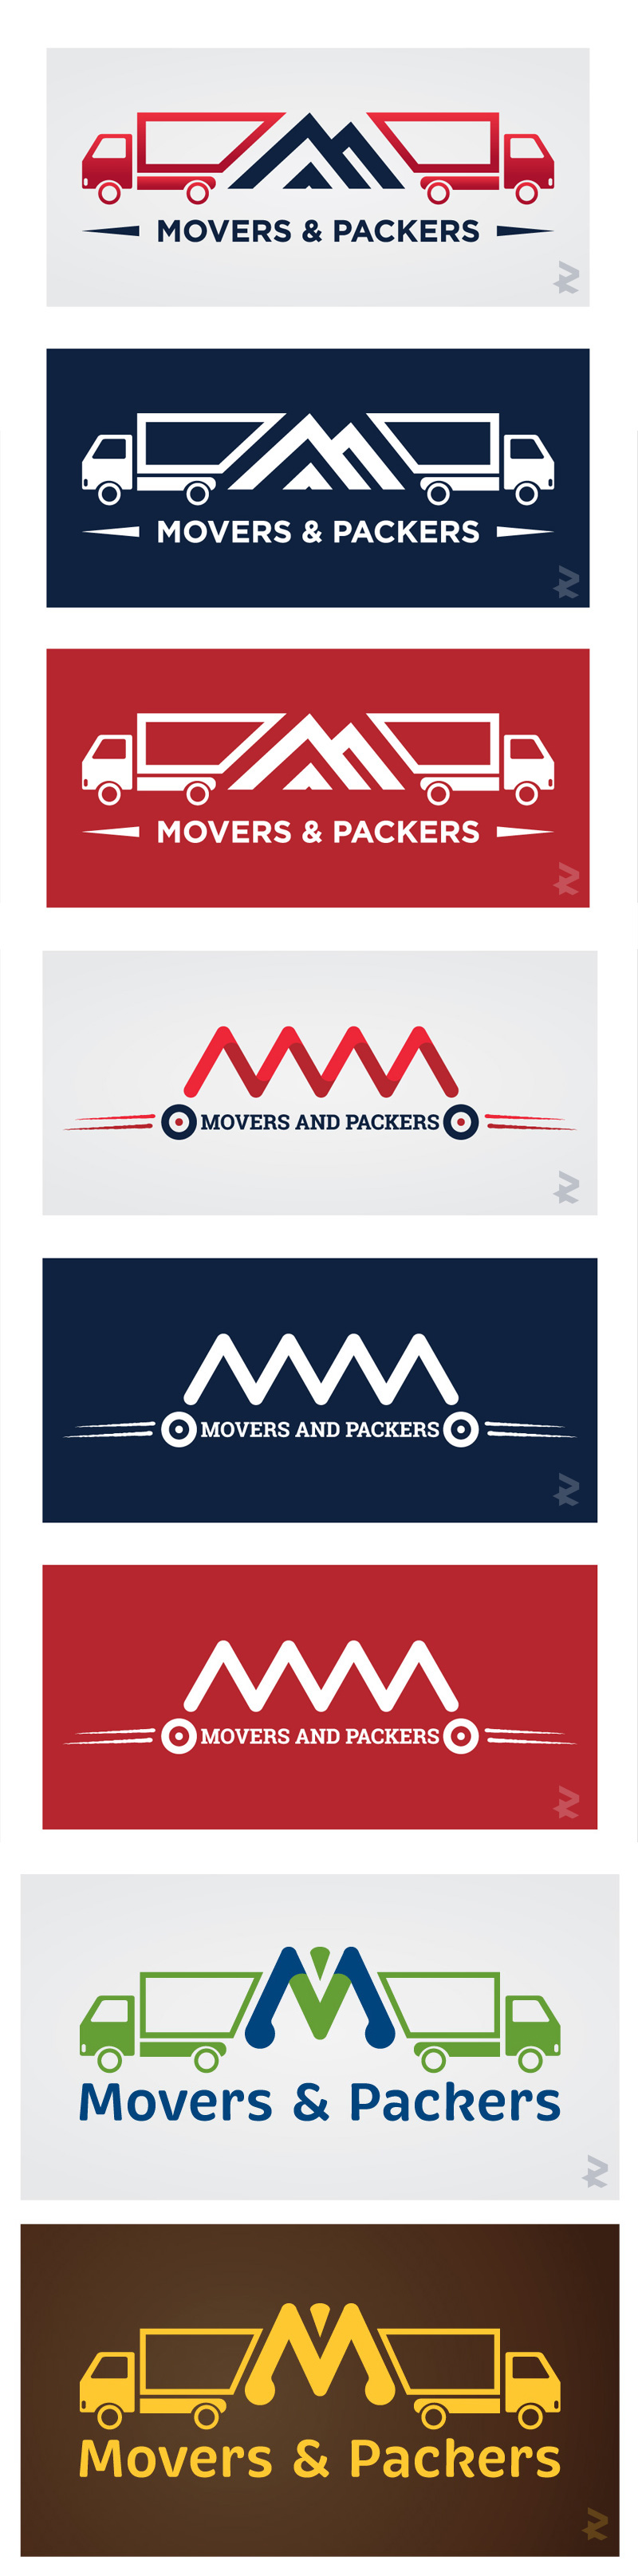 movers packers mm logo design idea